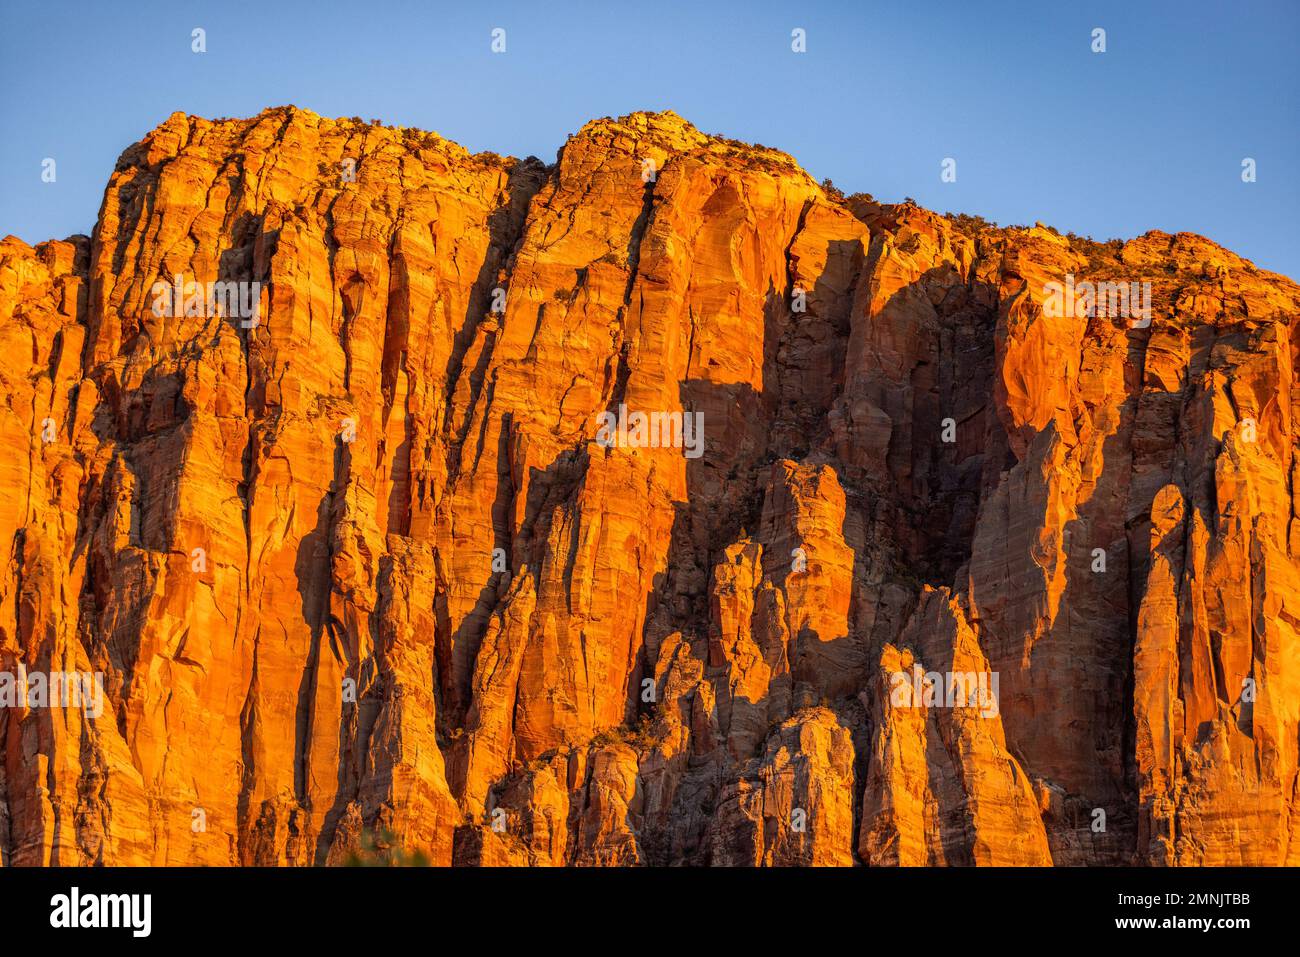 USA, Utah, Springdale, Red cliffs at sunset in Zion National Park Stock Photo